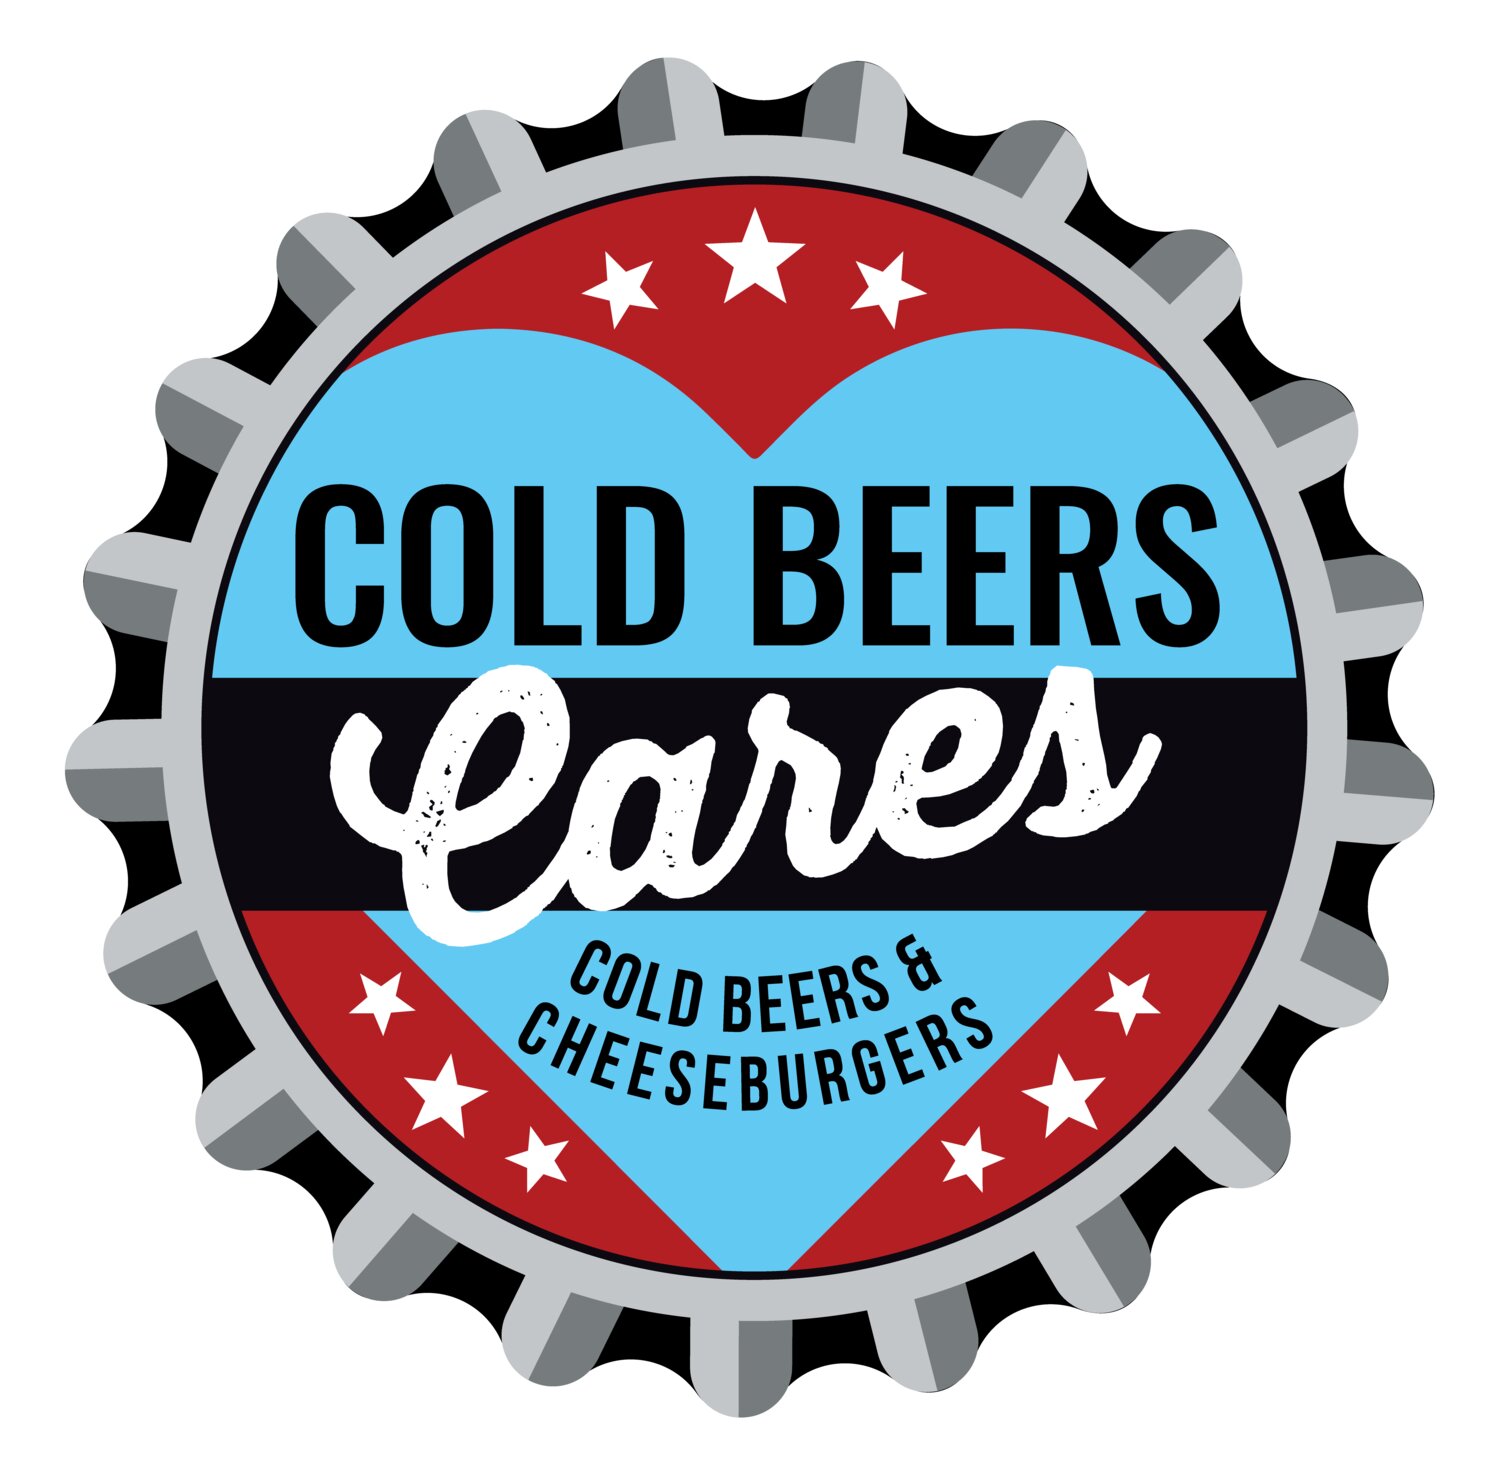 Cold Beers Cares typically spotlights an Arizona non-profit each month as well as various charity projects throughout the year.